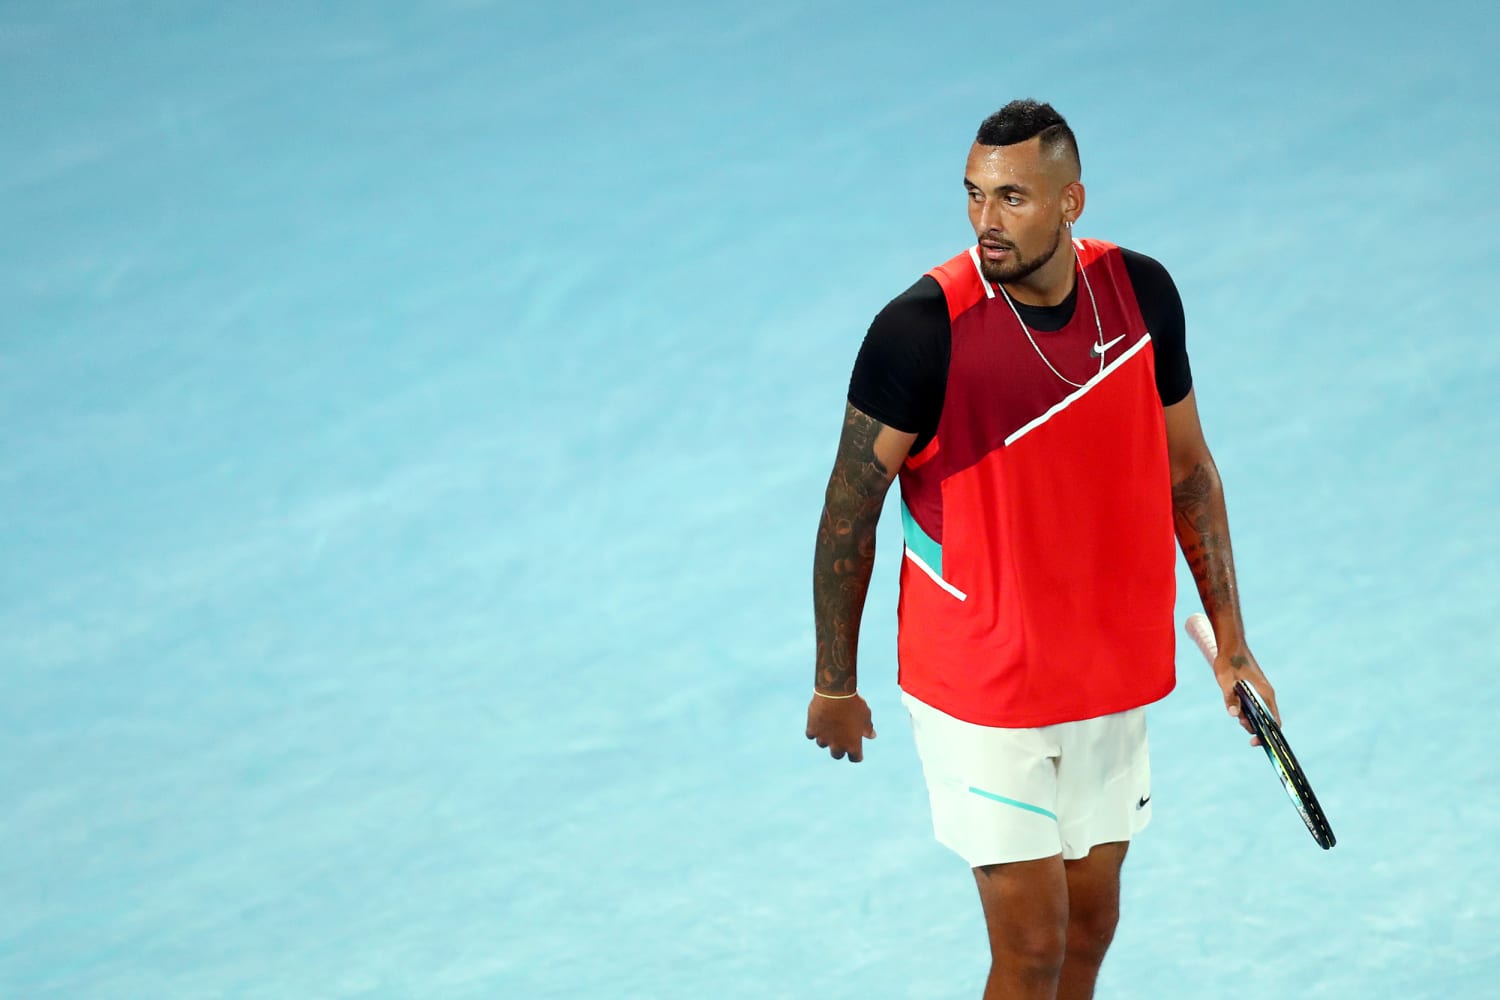 I felt worthless Tennis star Nick Kyrgios opens up about mental health struggles